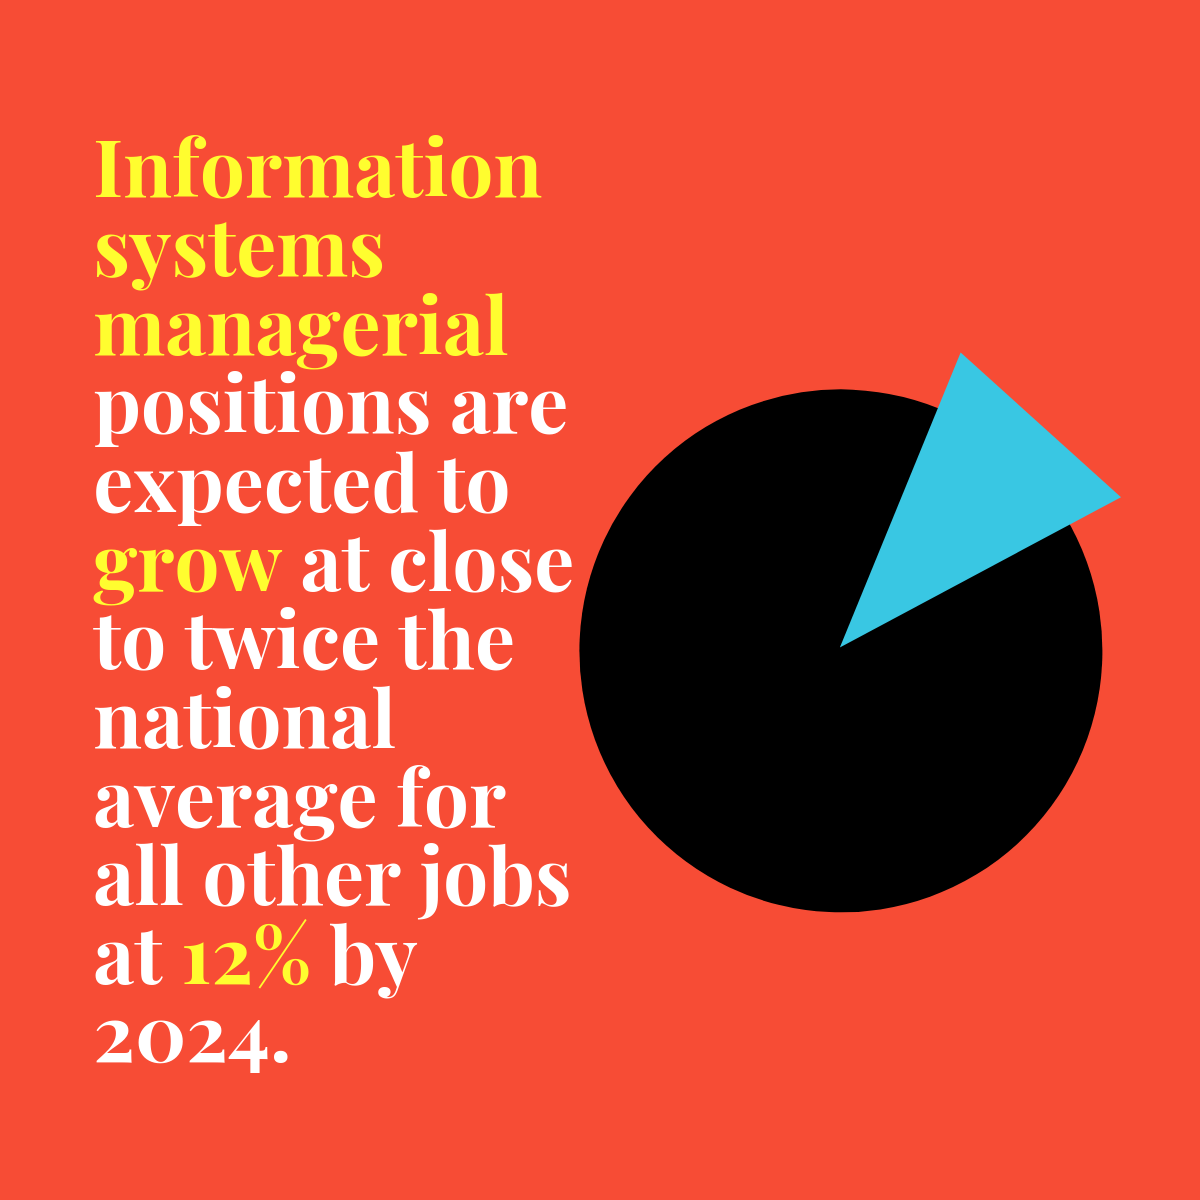 Information systems managerial positions are expected to grow at close to twice the national average for all other jobs at 12% by 2024.